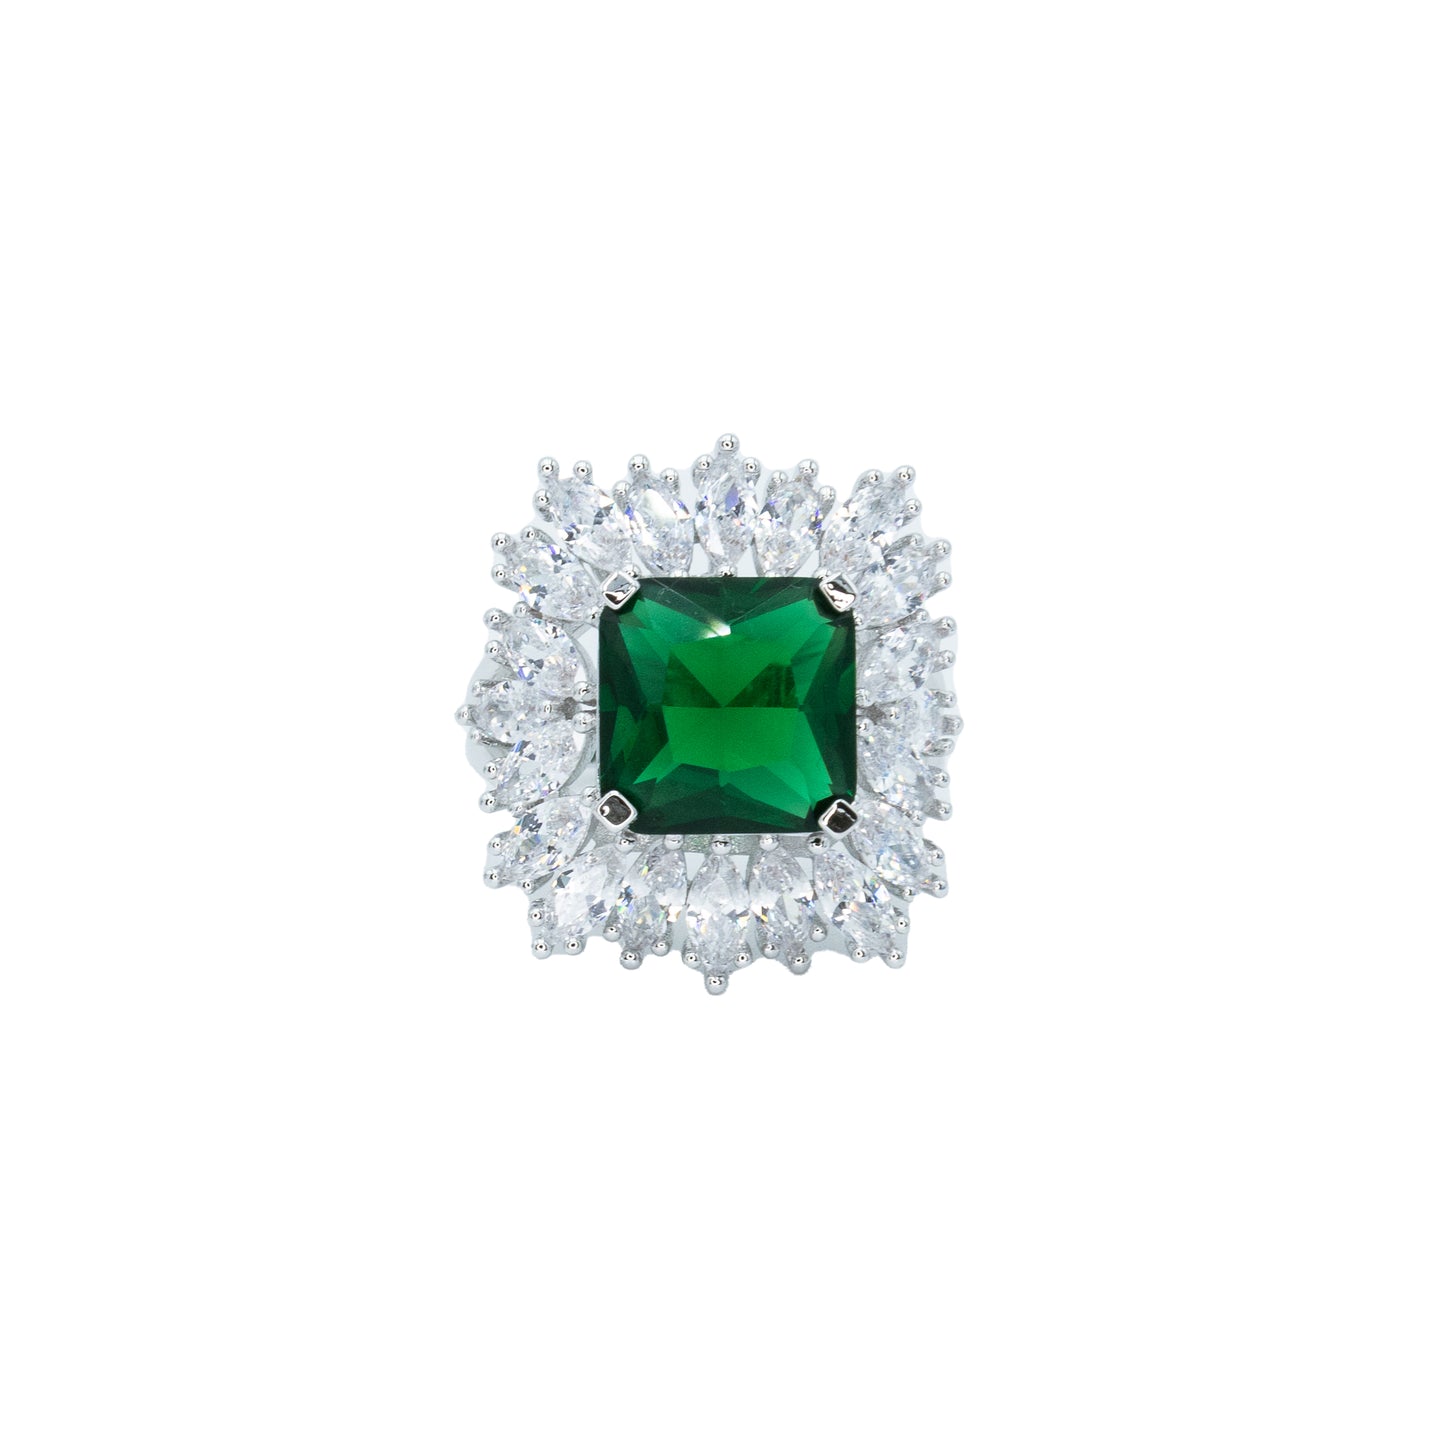 Emerald stone ring clustered w/ 3A CZ stones rhodium plated